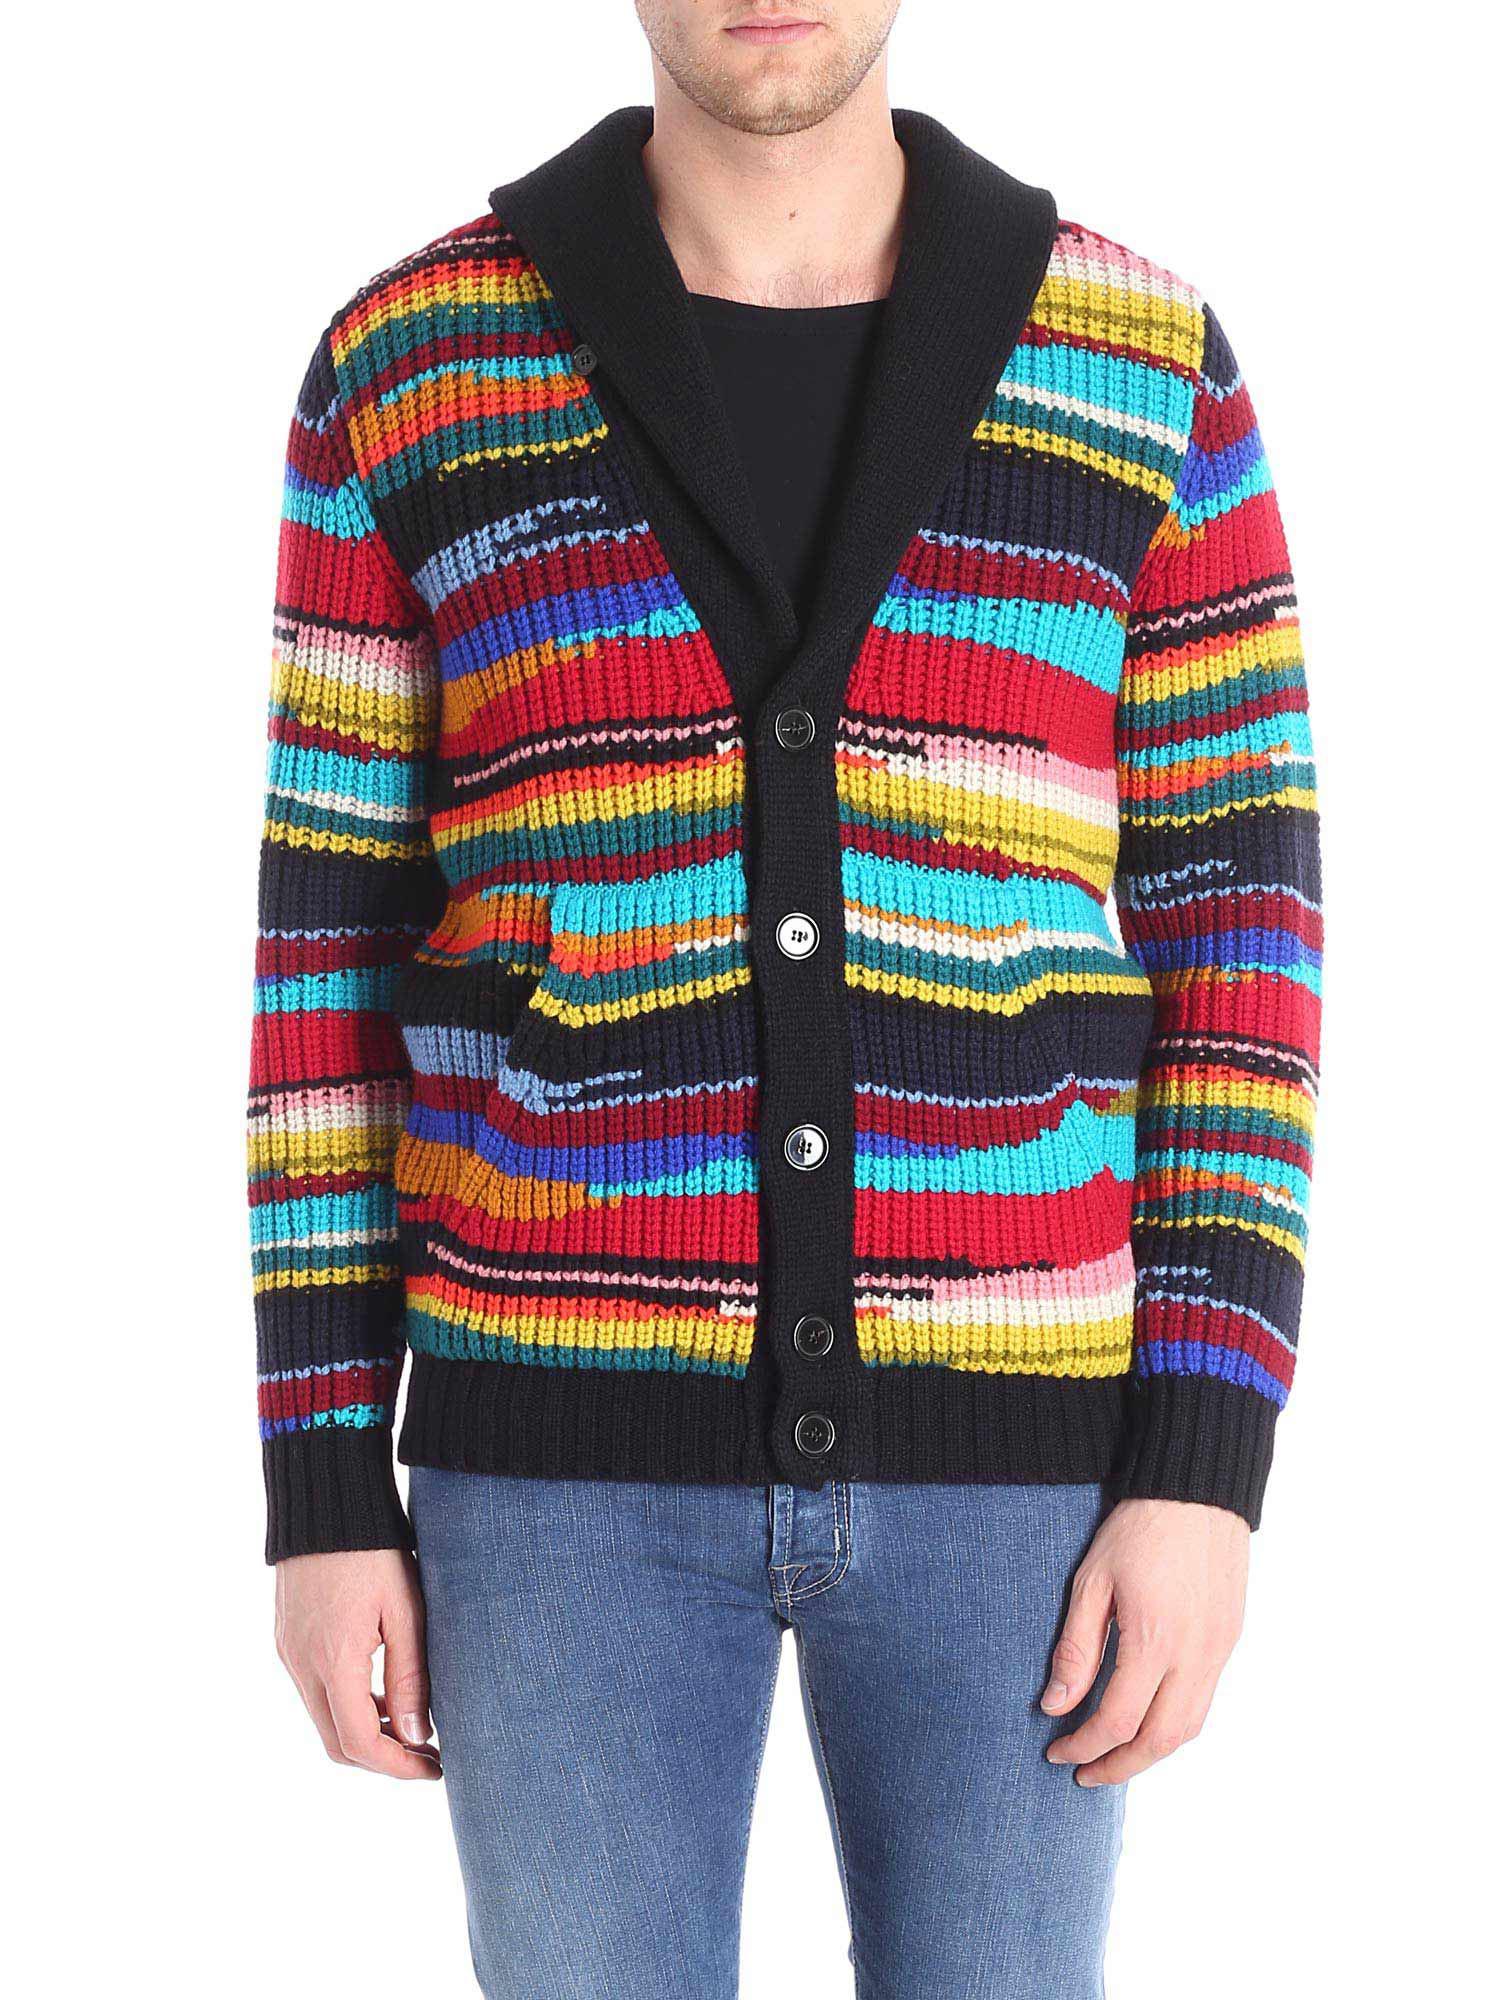 Missoni Wool Cardigan With Multicolor Inlay for Men - Lyst